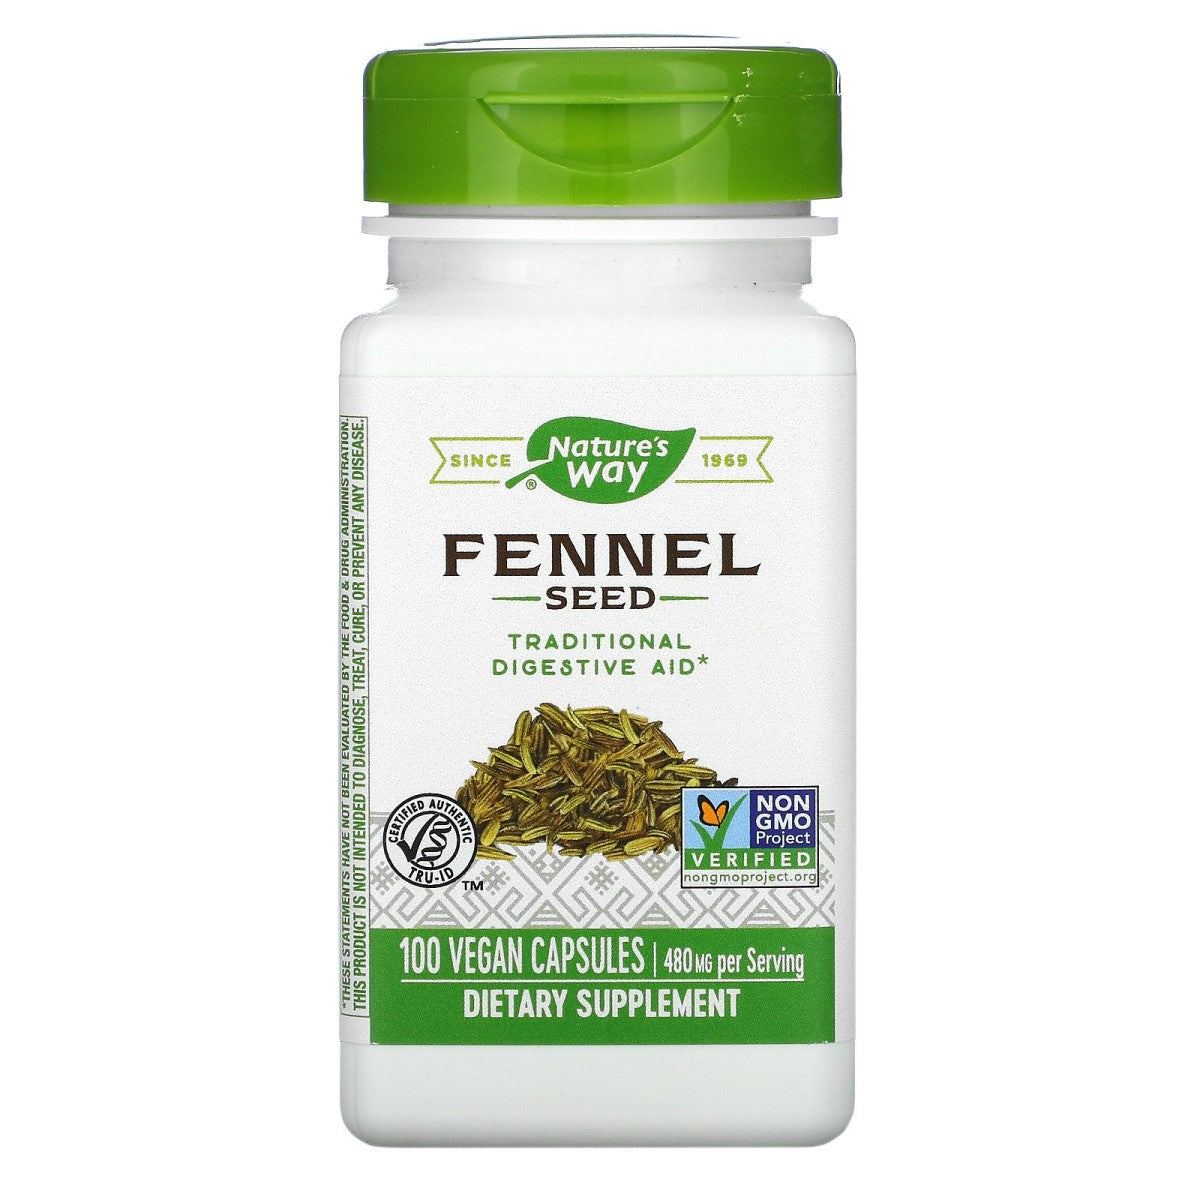 Primary image of Fennel Seed